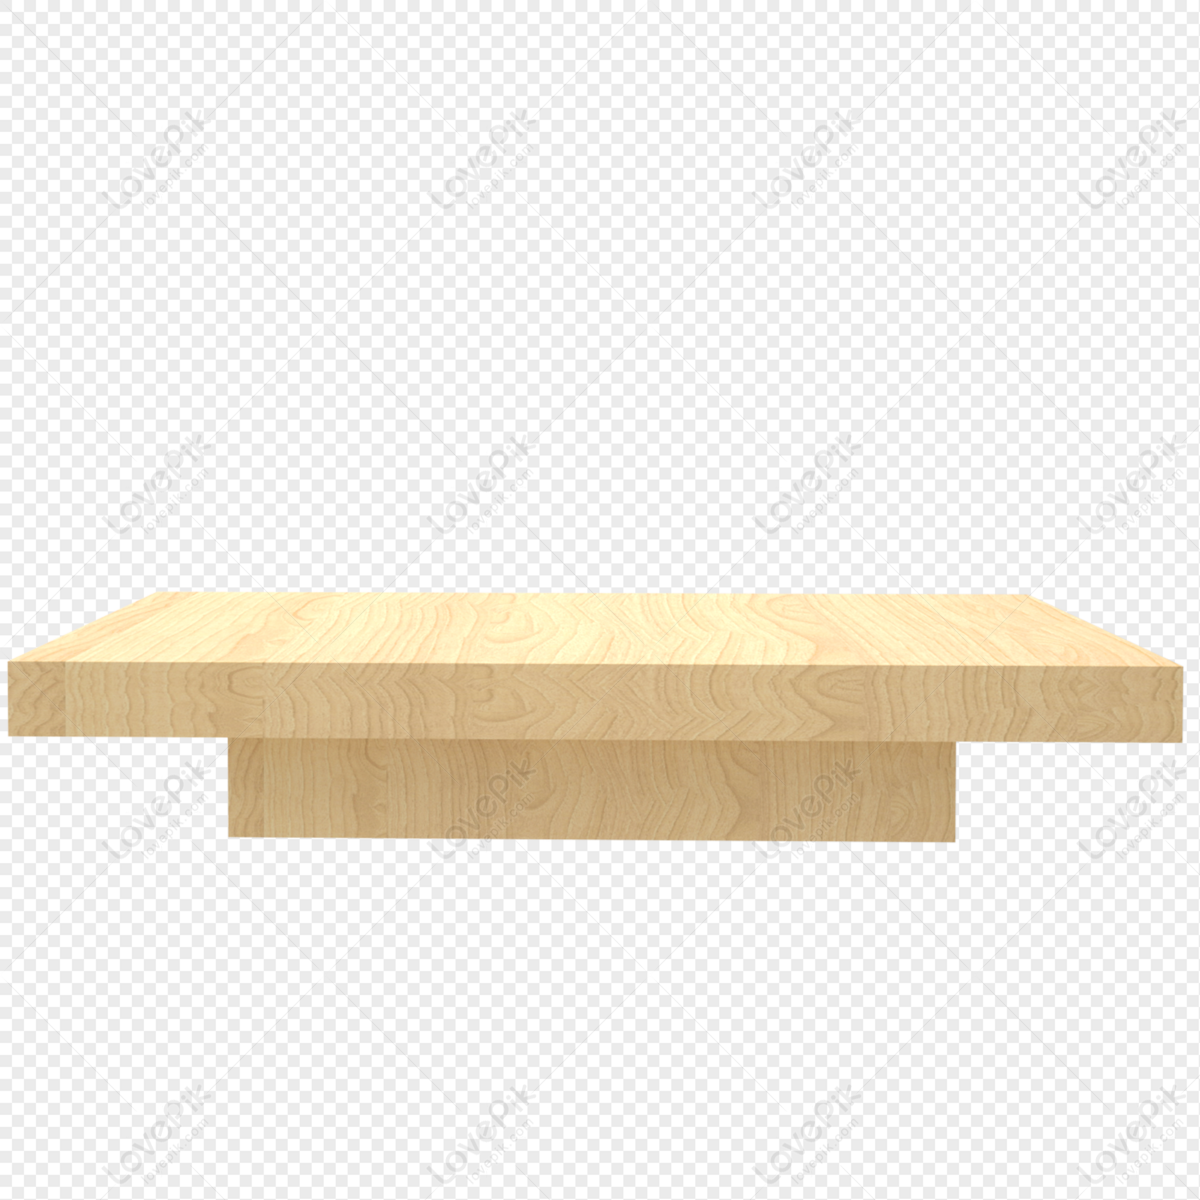 Wood grain product display stand, stand, wood stand, display stand png transparent background